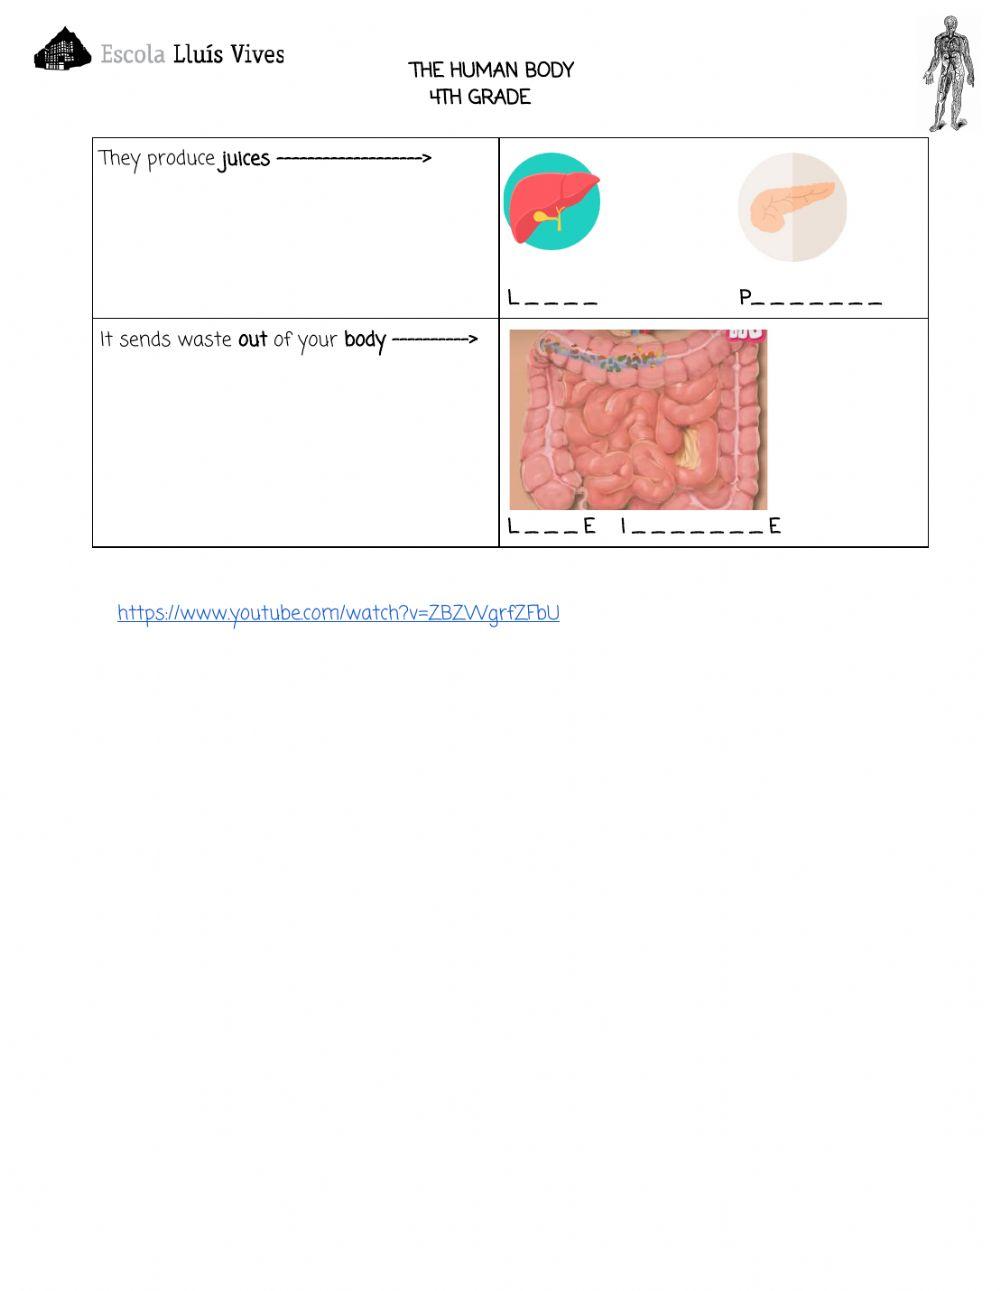 4th.The human body. DIGESTIVE SYSTEM